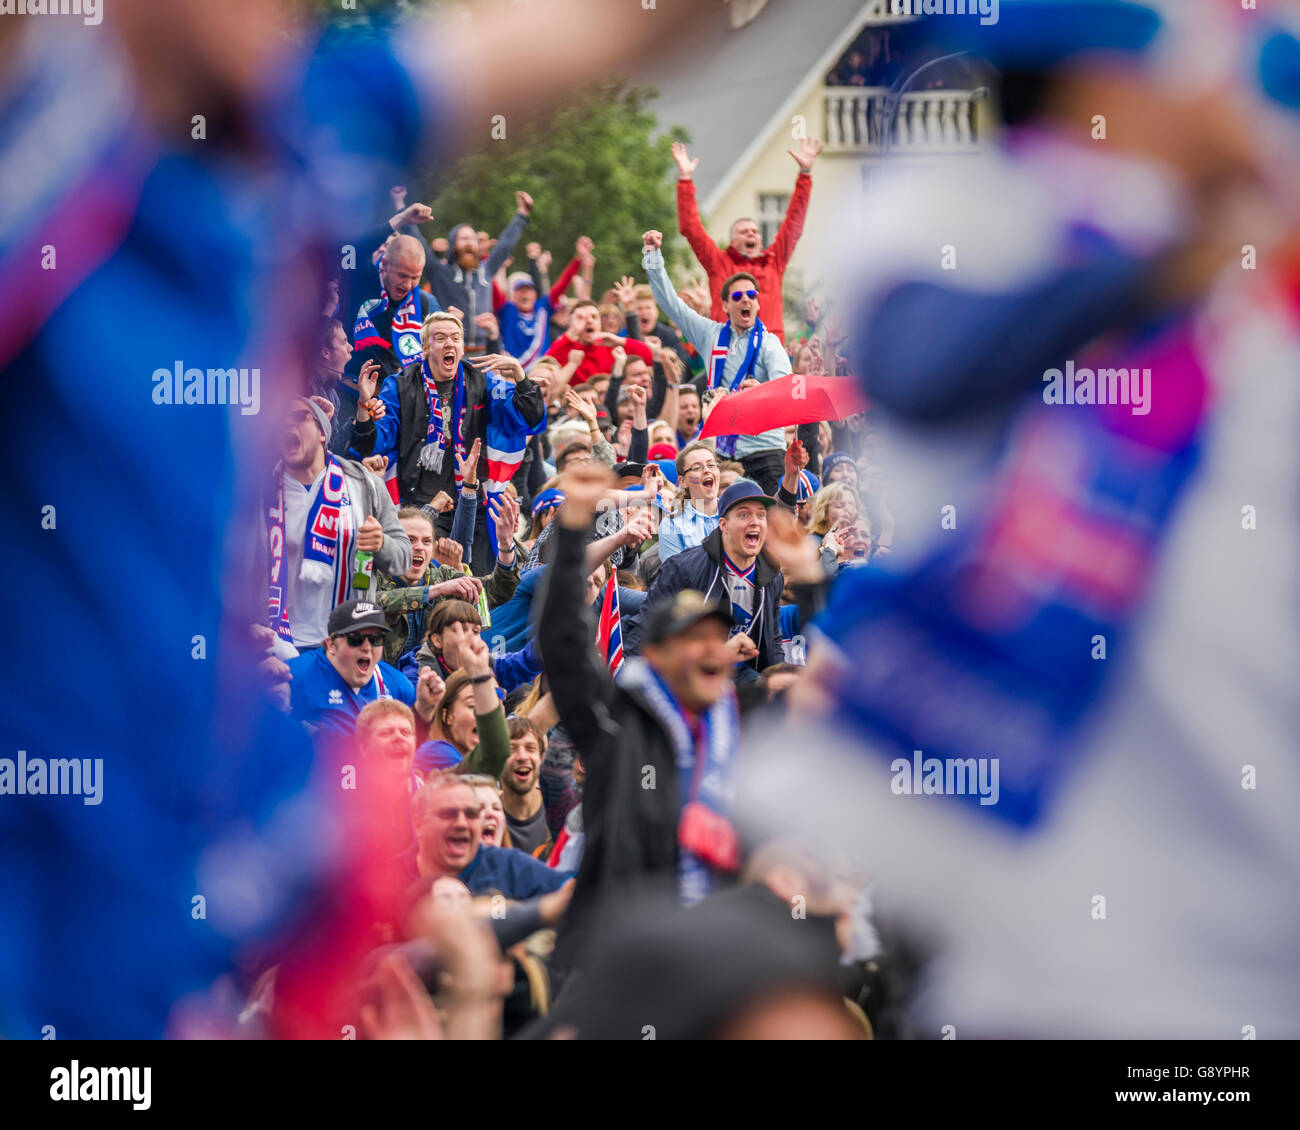 Crowds in downtown Reykjavik watching Iceland vs England in the UEFA Euro 2016 football tournament, Reykjavik, Iceland. Iceland won 2-1. June 27, 2016 Stock Photo